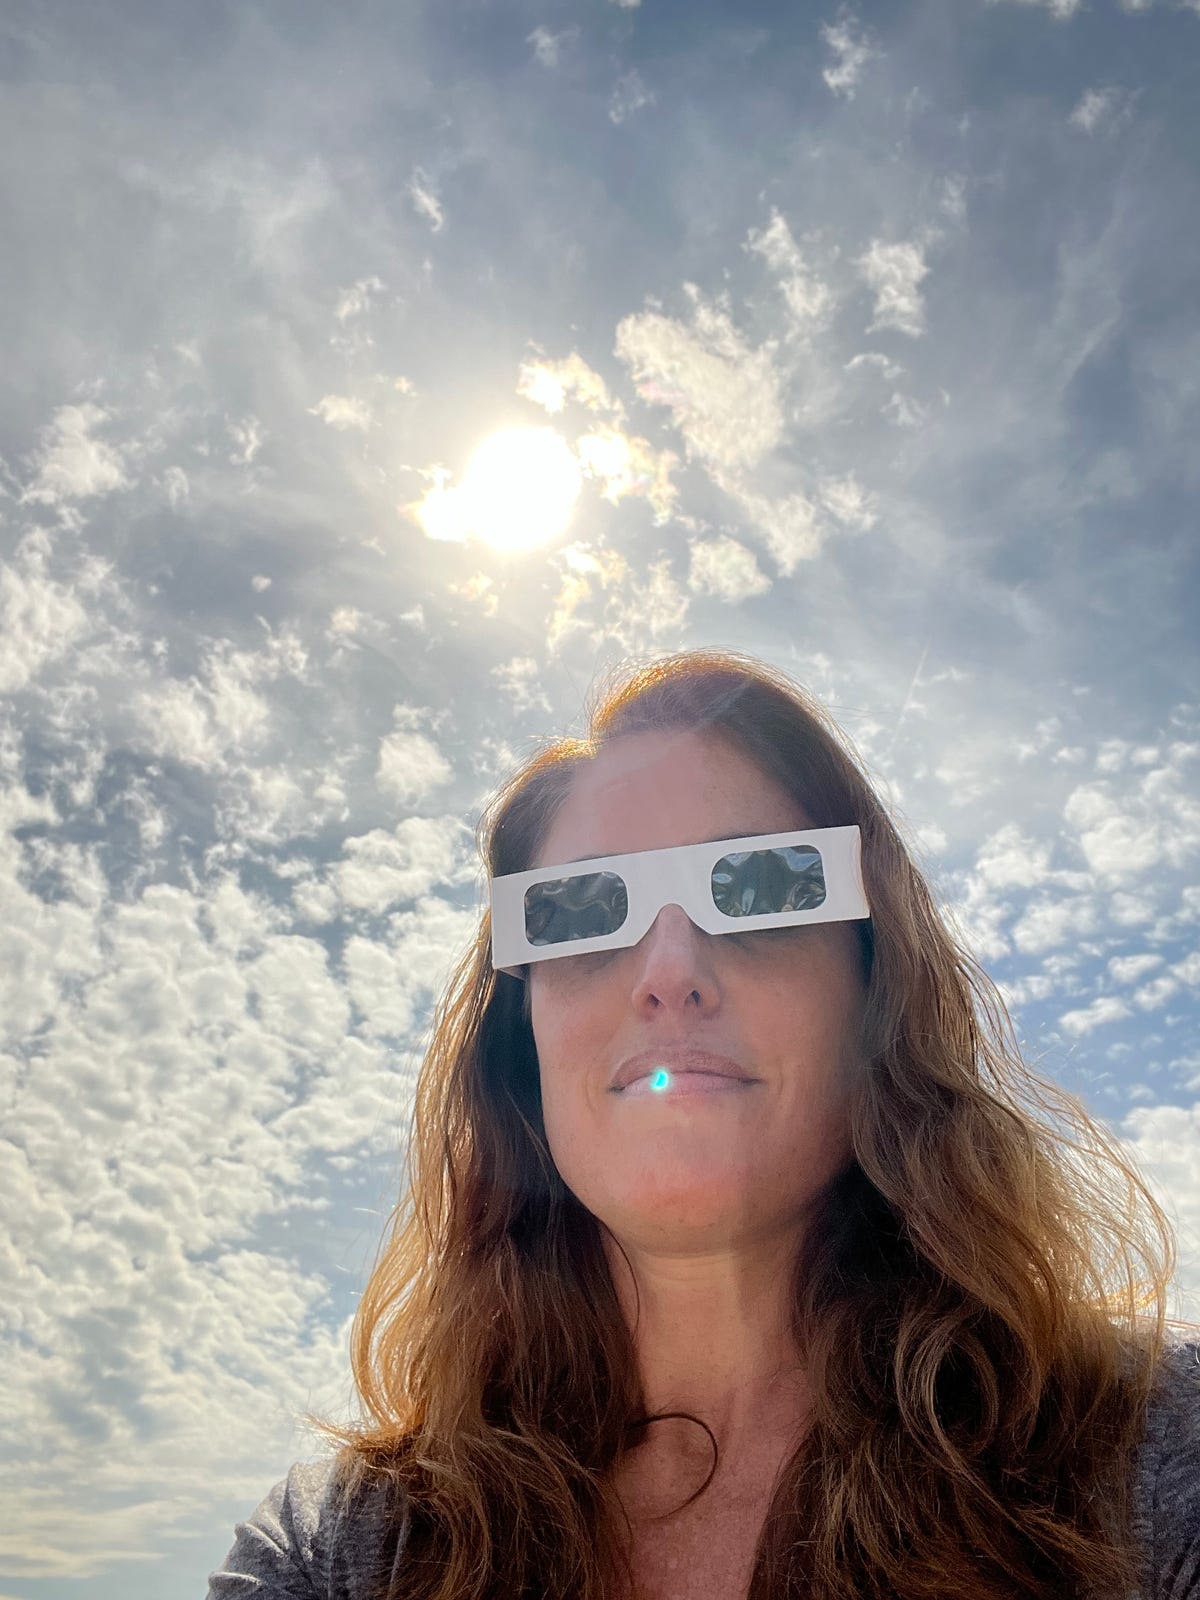 Sent in by Emily Brown, Washington, DC: "I went to the rooftop of my building in DC. Lots of neighbors up there, as well. Not many folks had eclipse glasses so I let them borrow mine for a peek!"